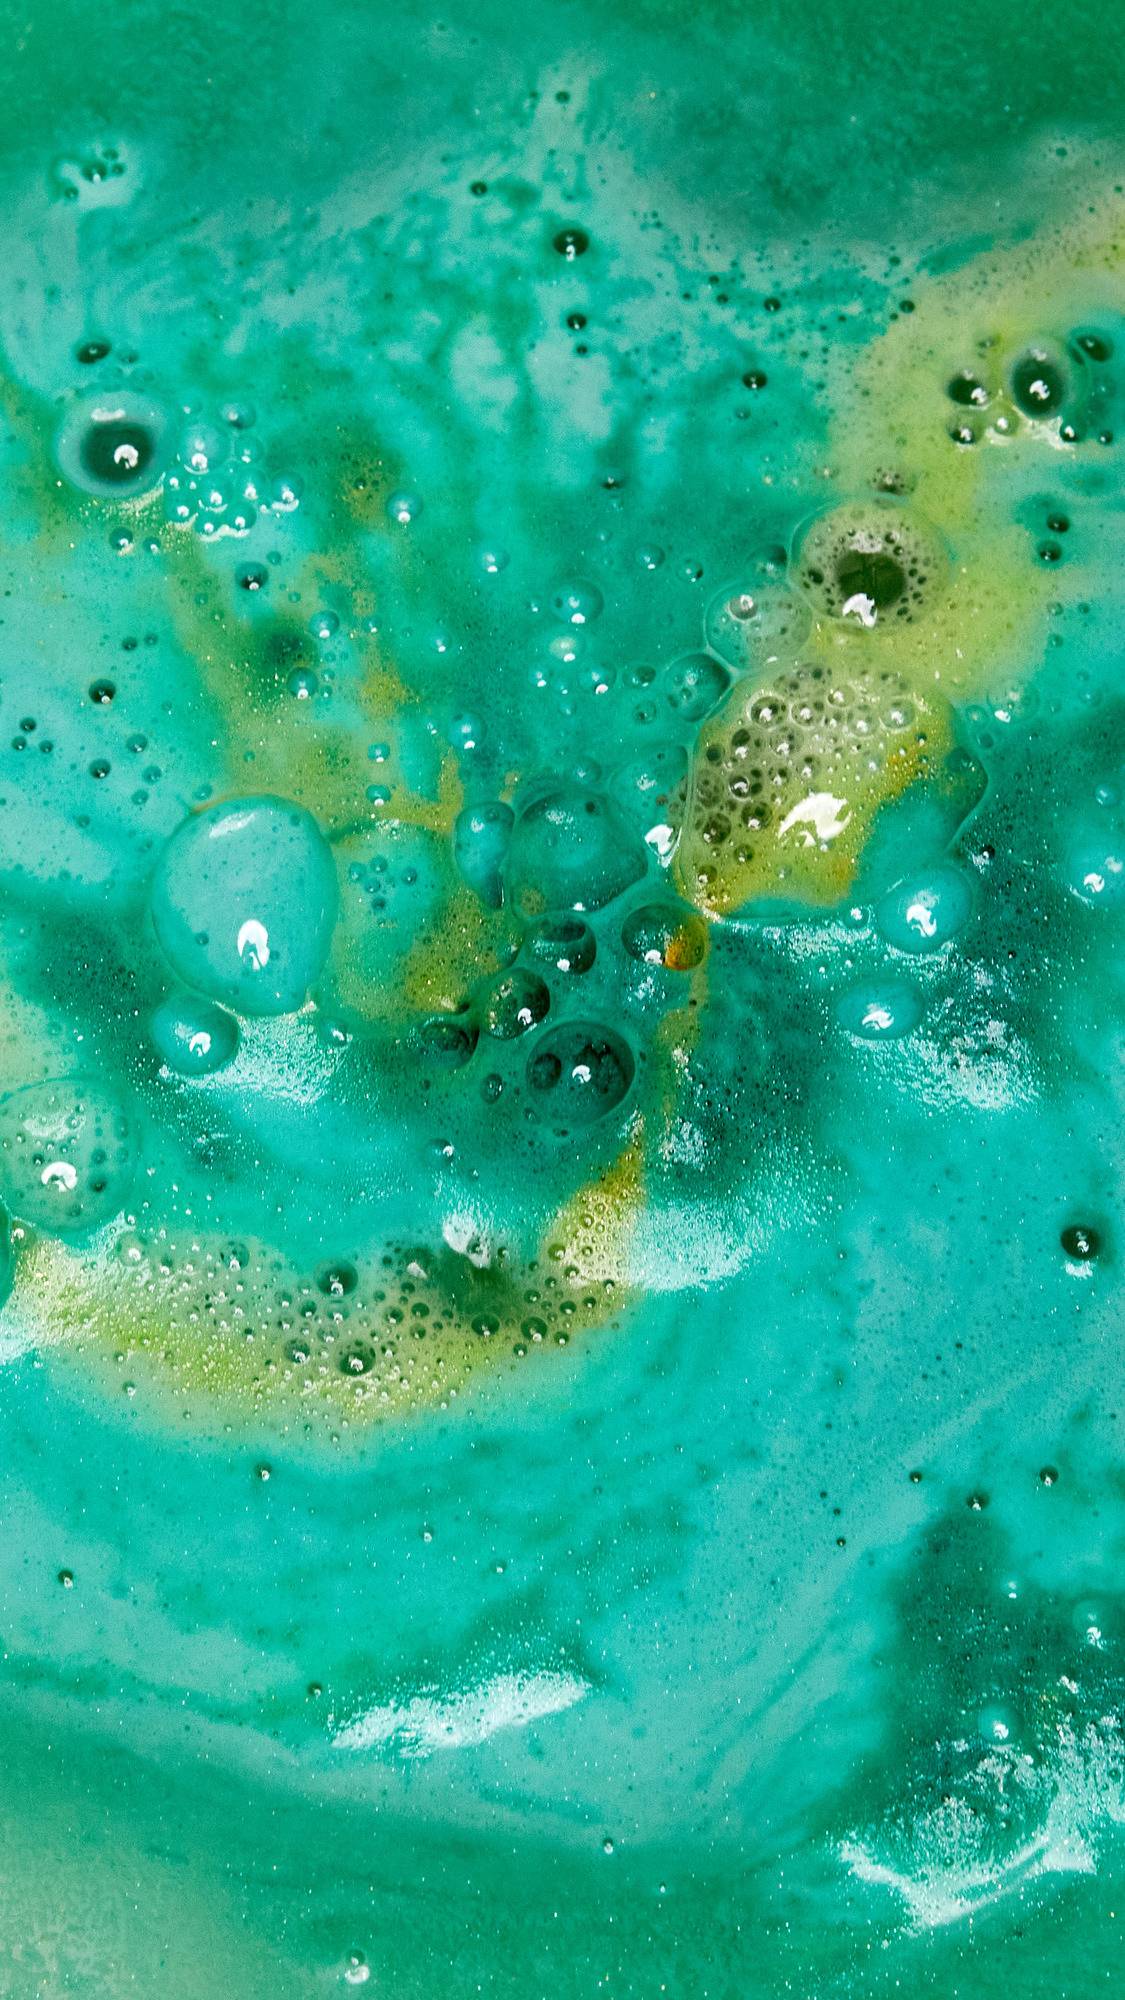 The Druid of Bath bath bomb is slowly dissolving leaving behind bubbly swirls of deep green and golden foam. 